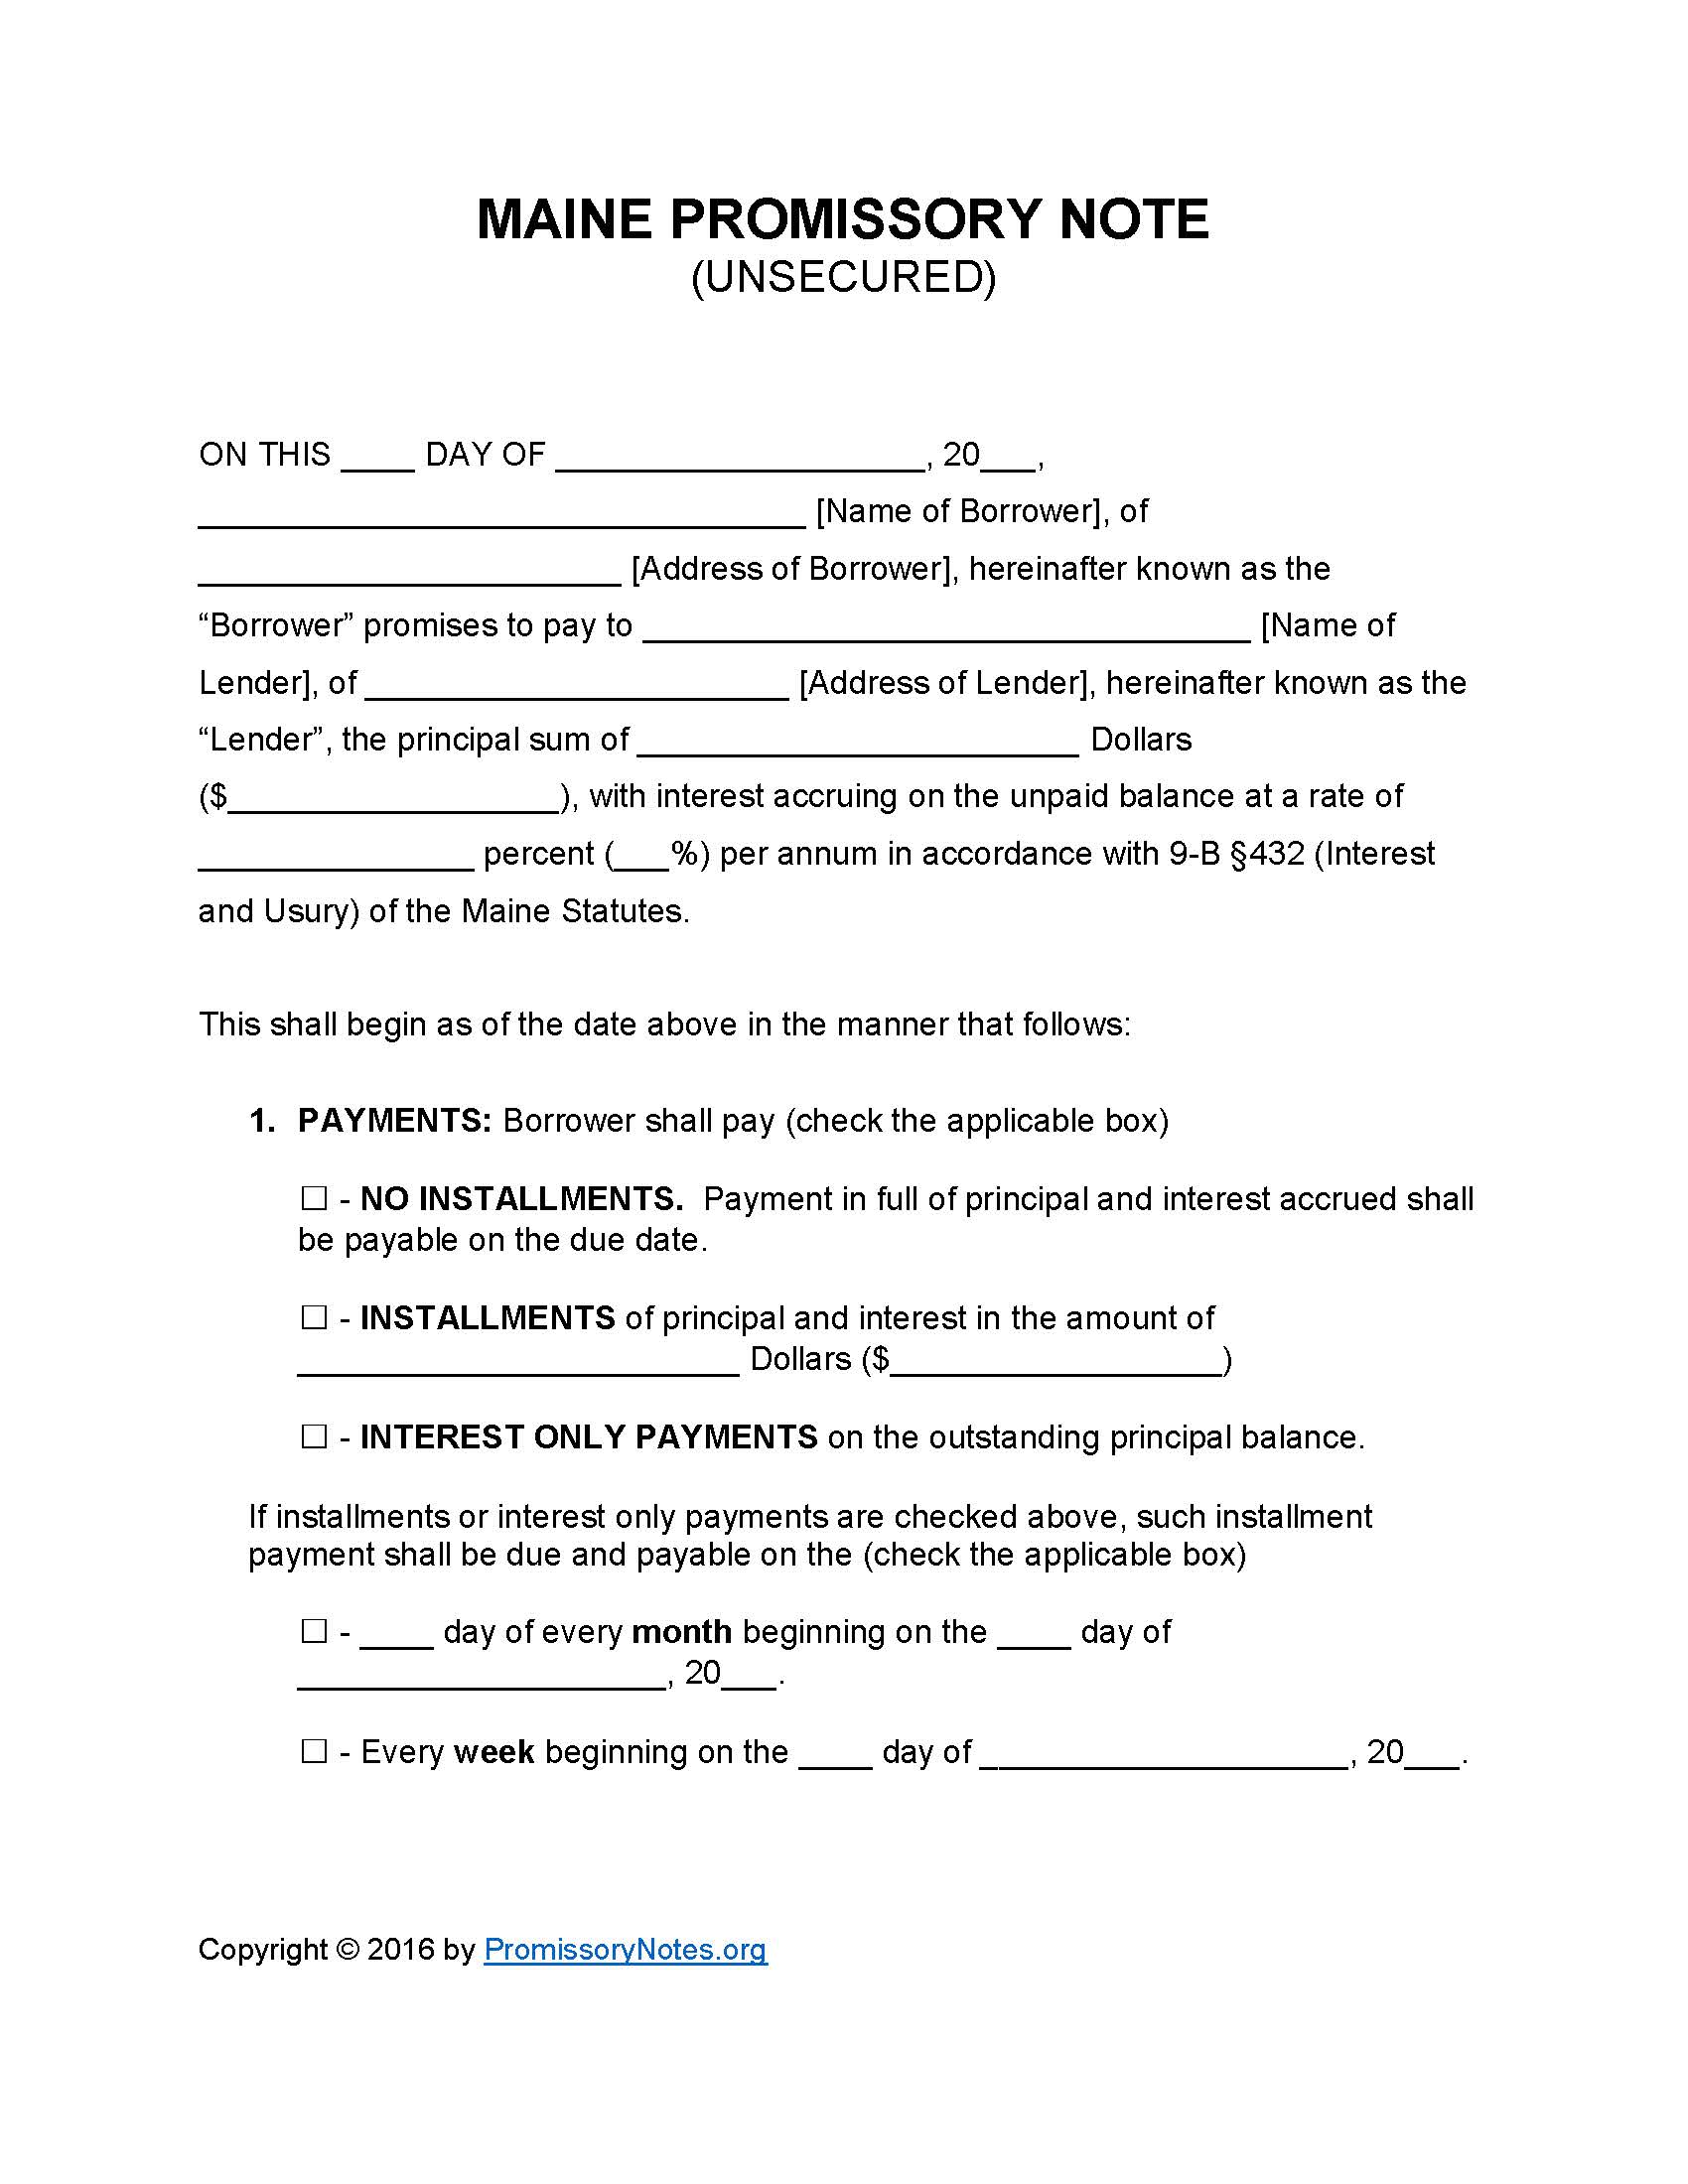 maine-unsecured-promissory-note-form